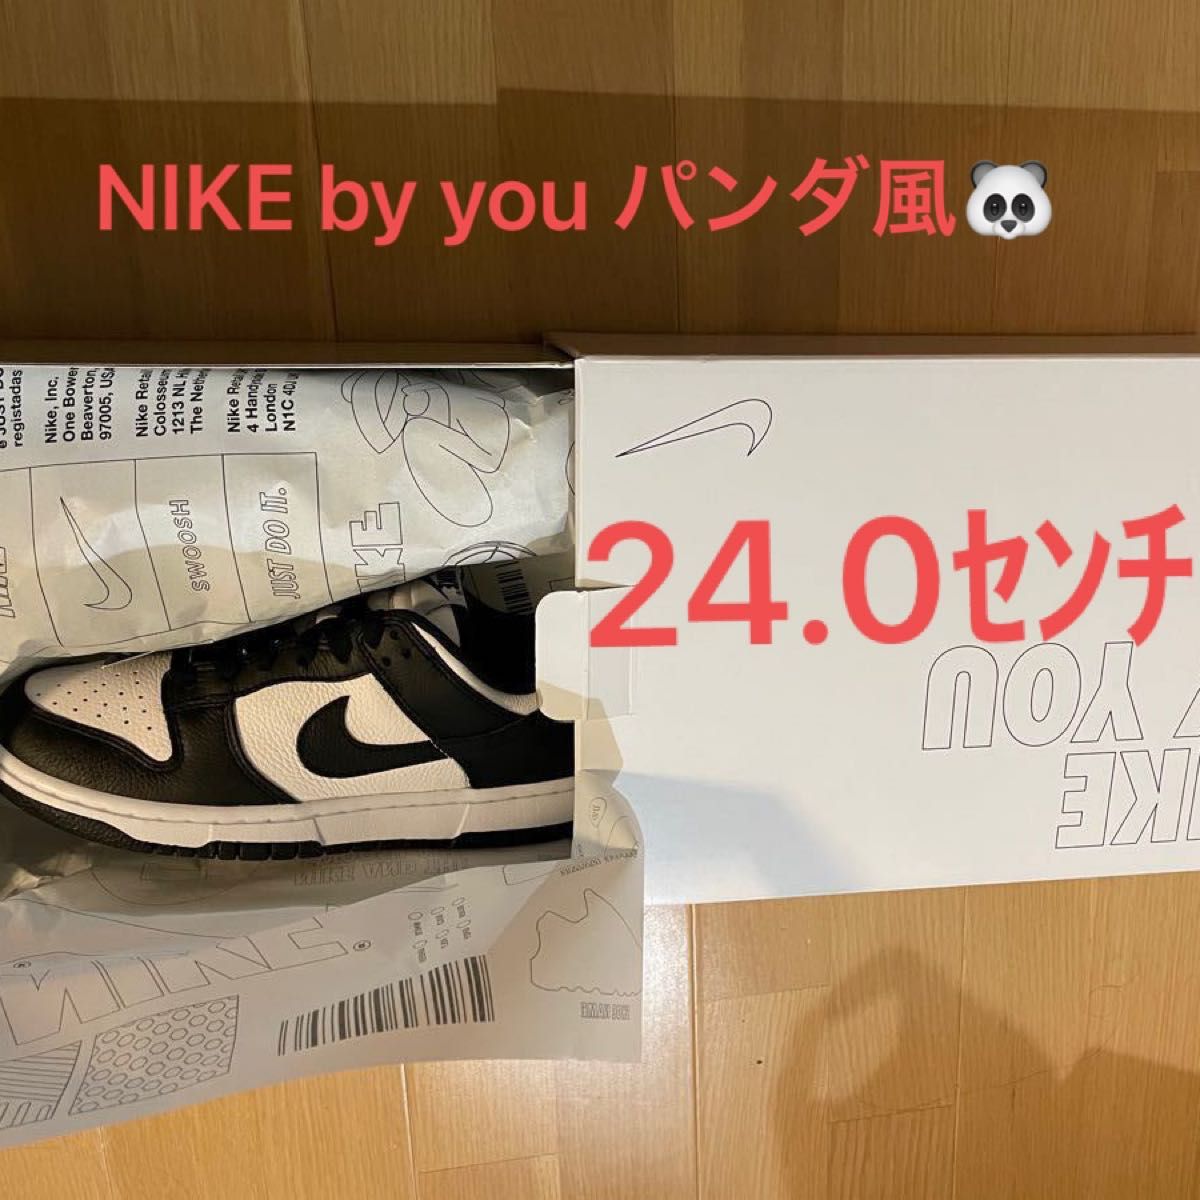 Nike by You DUNK Low ナイキ バイユー ダンク ロー ブラック/ホワイト